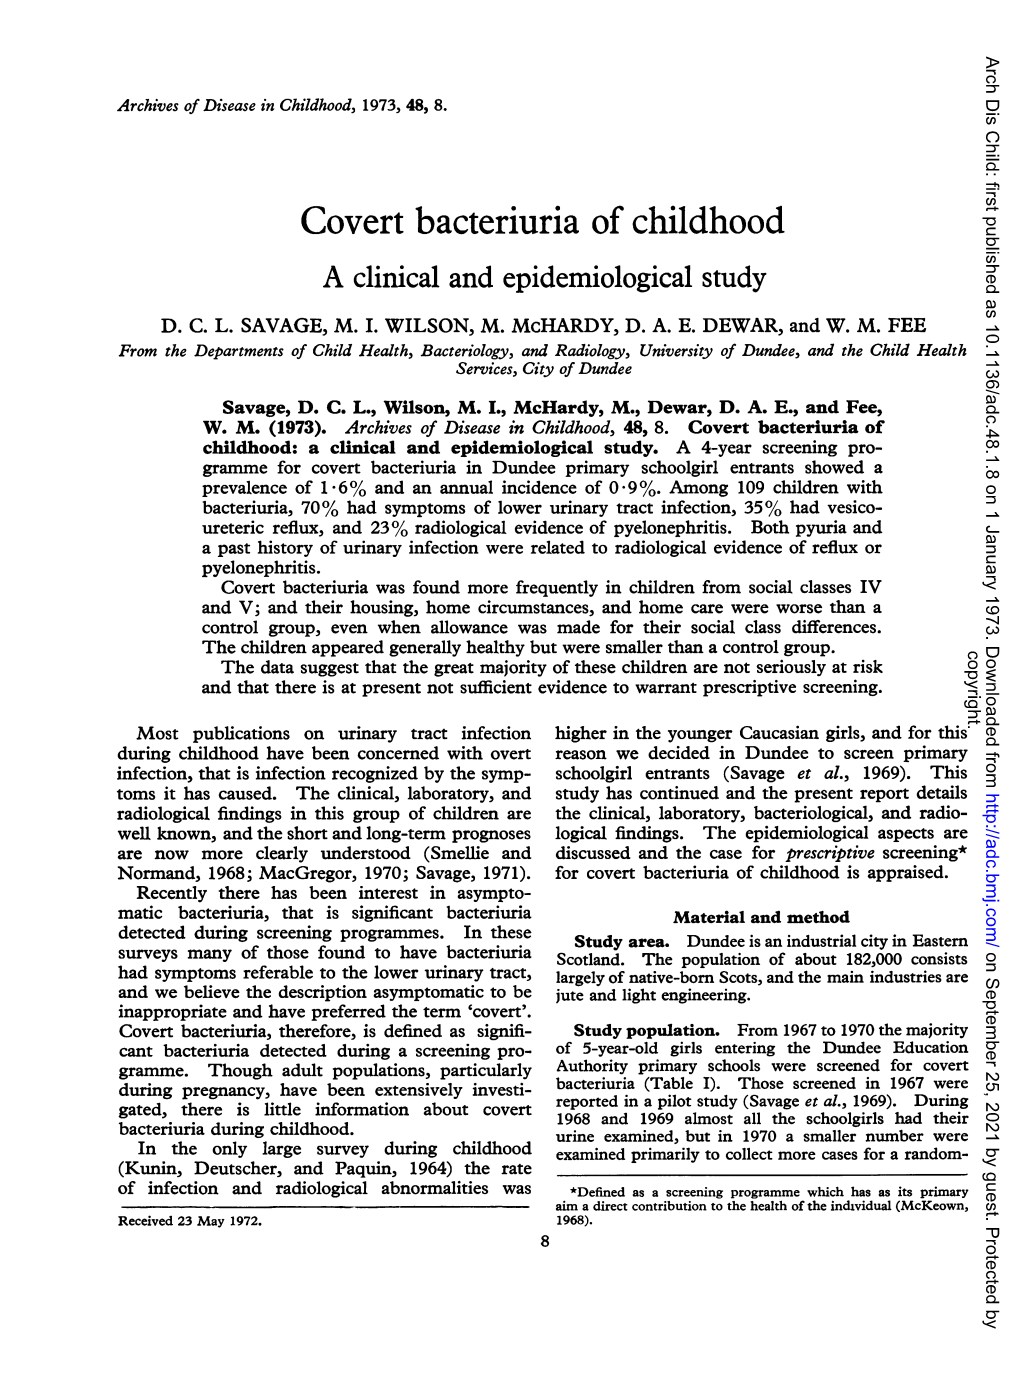 Covert Bacteriuria of Childhood a Clinical and Epidemiological Study D